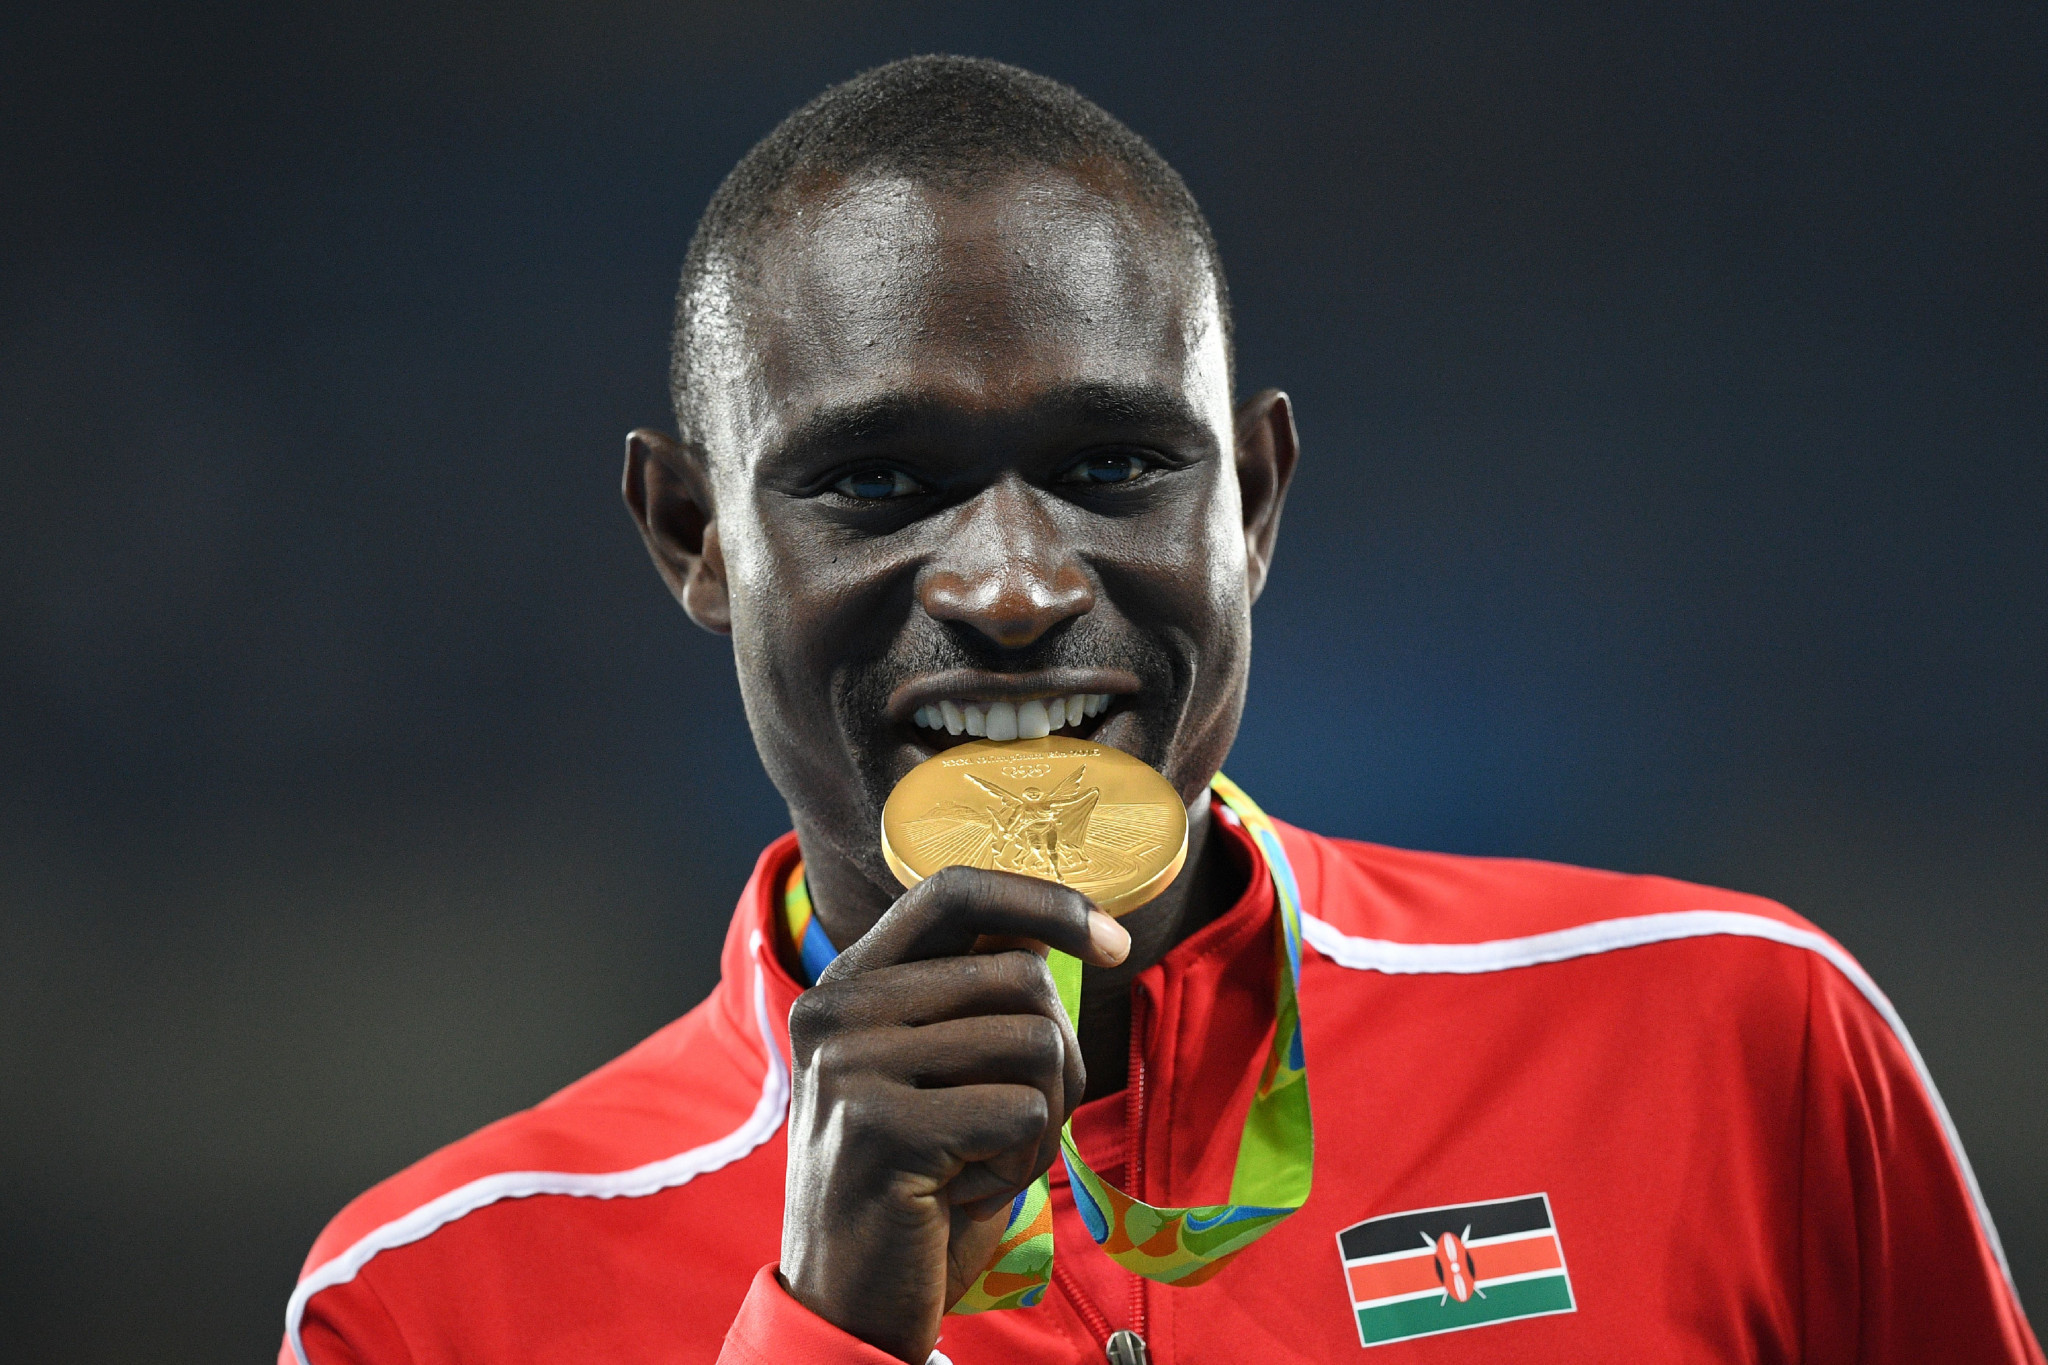 David Rudisha will hope to secure a third Olympic title next year at Tokyo 2020 ©Getty Images